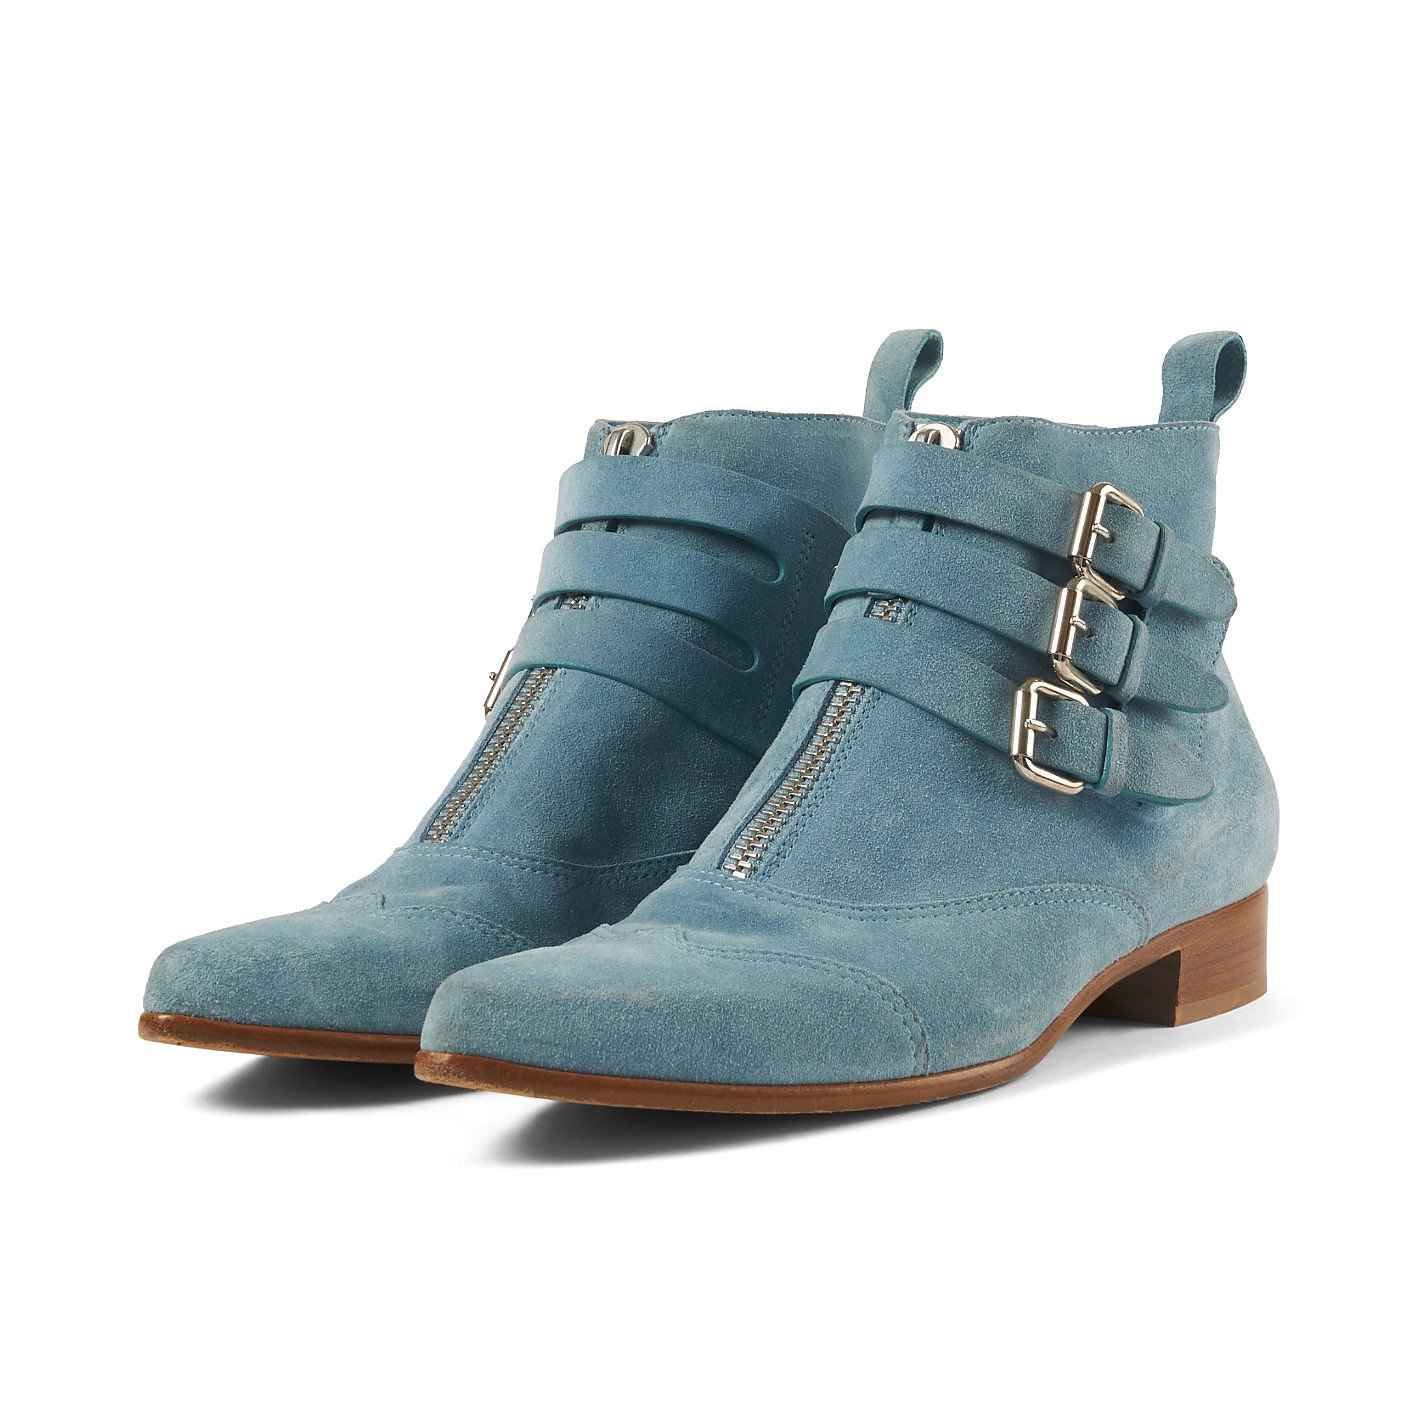 Tabitha Simmons Suede Ankle Boots